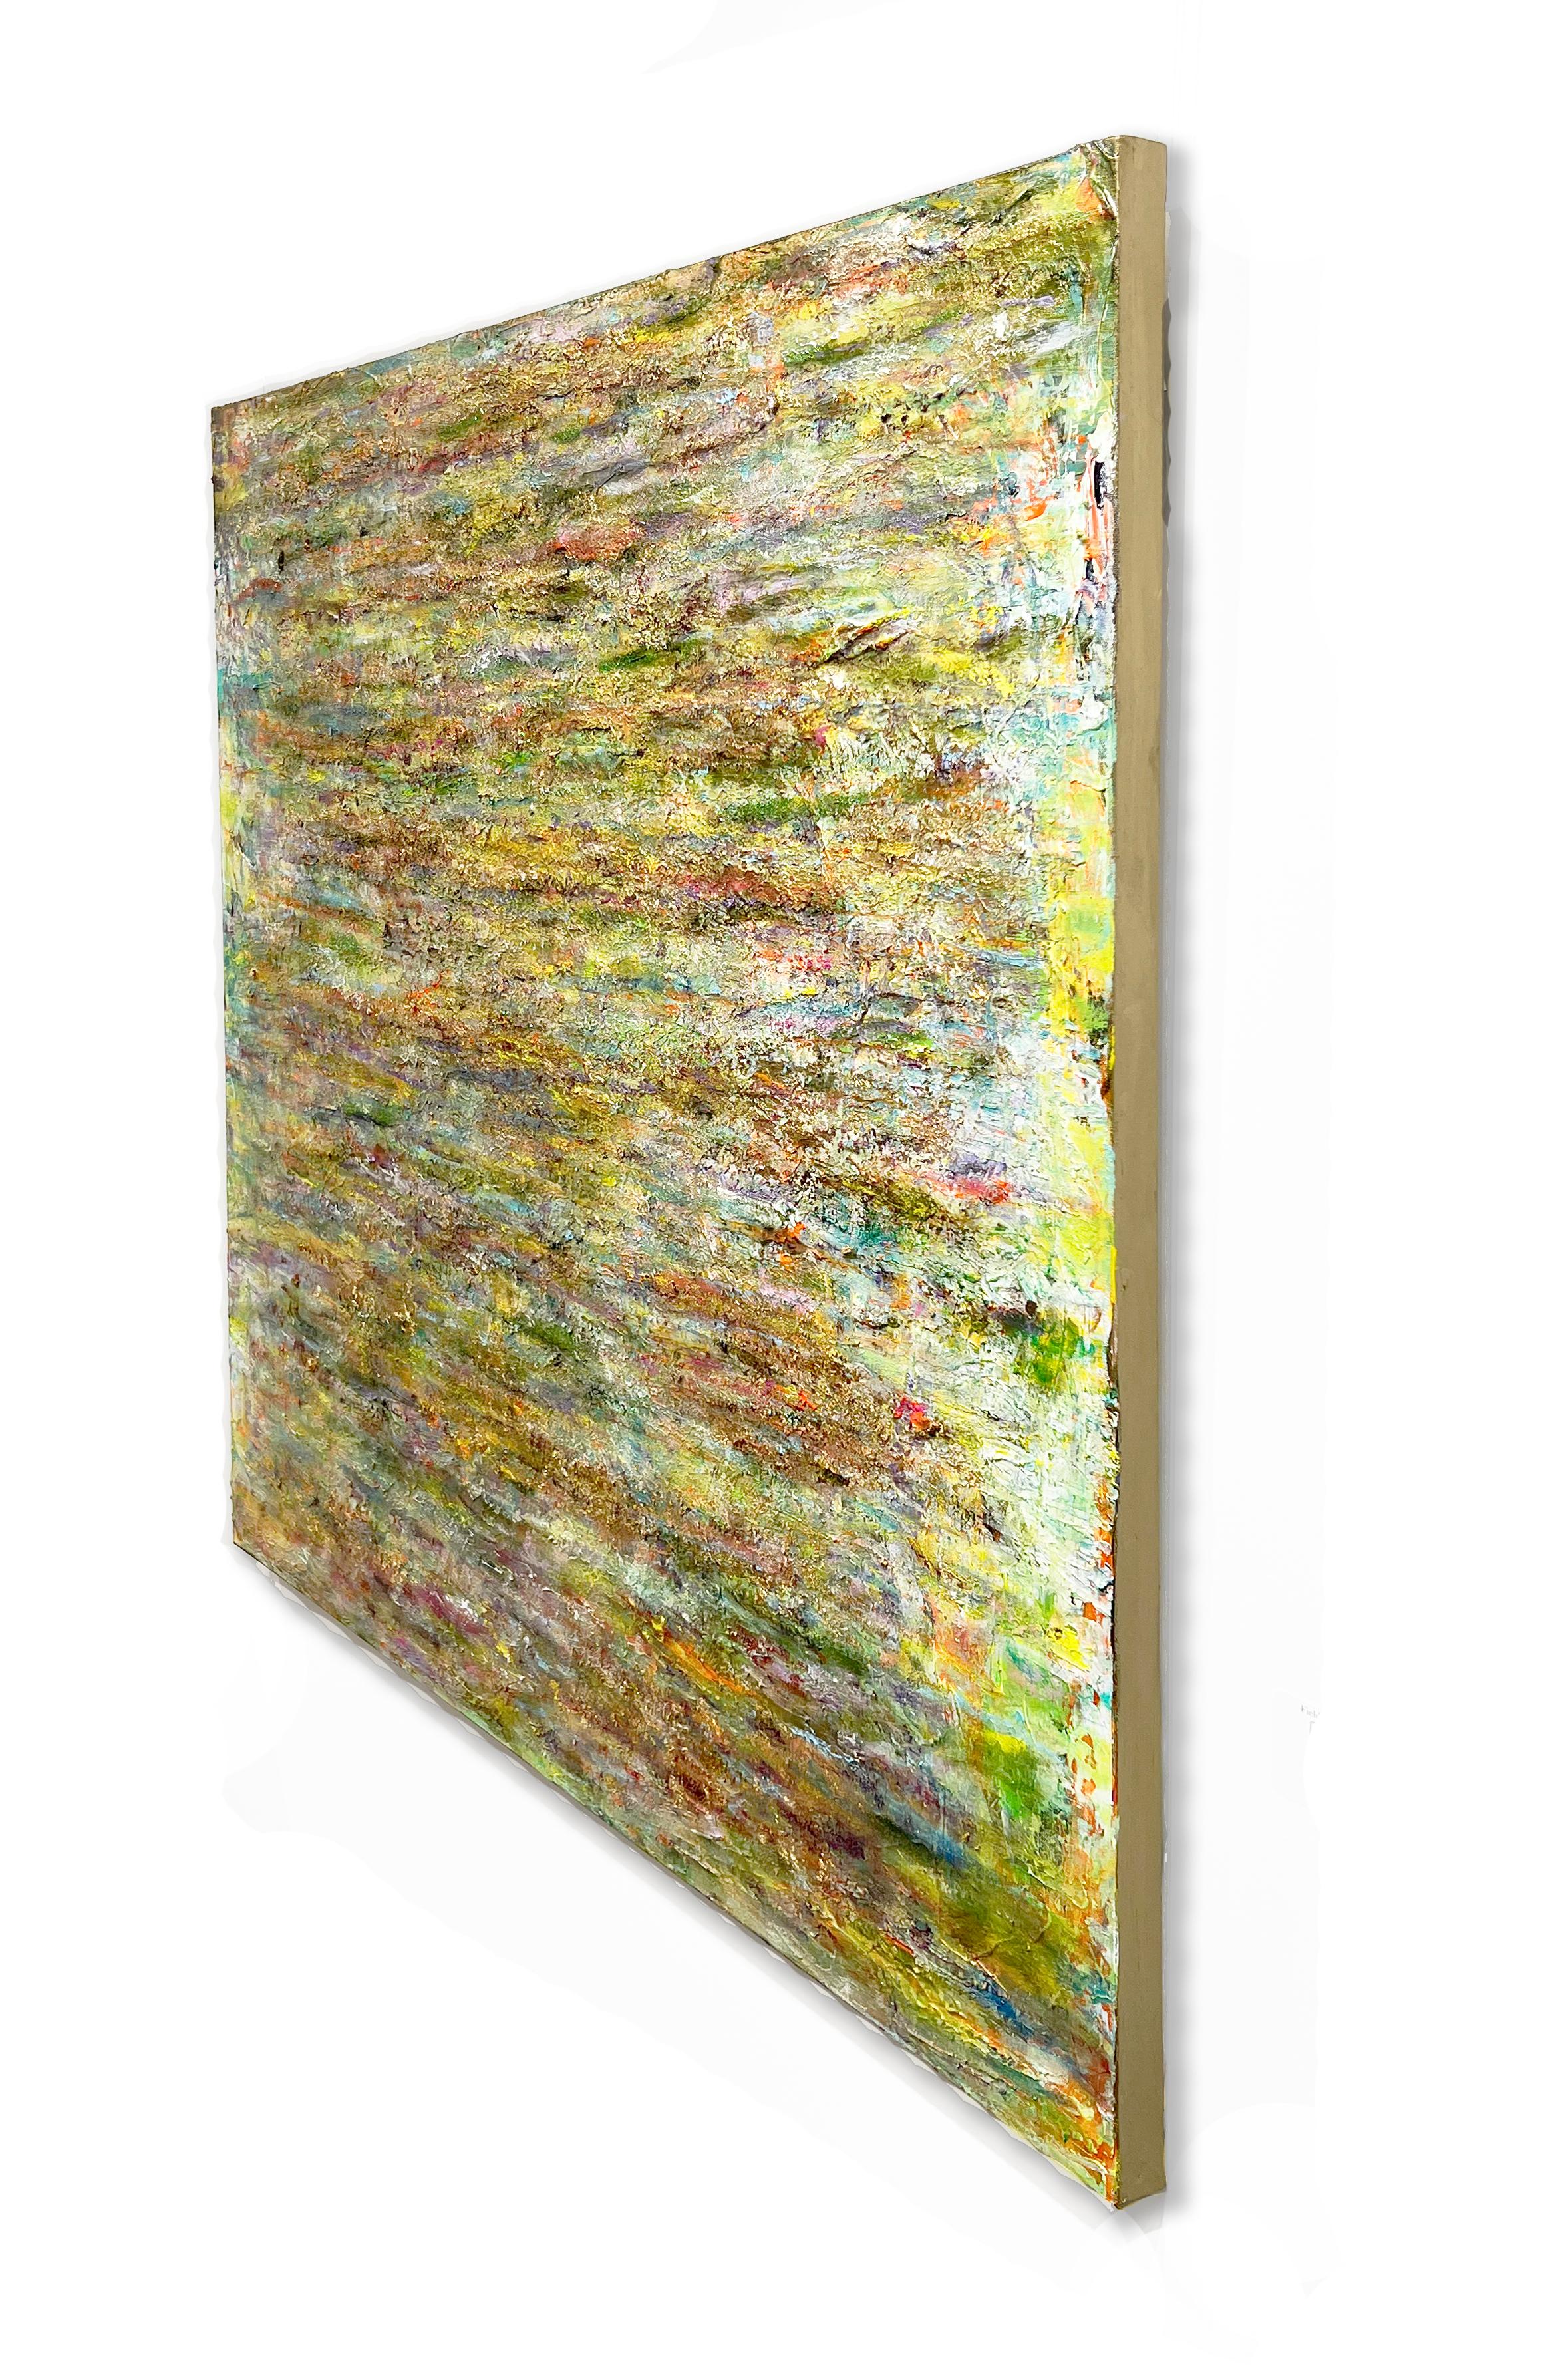 This 48 inch square textural mixed media painting on canvas is wired and ready to hang. It is hand signed by the artist on the back of the artwork. This piece is brought to life by an amazing tactile quality. The built up texture and colors create a